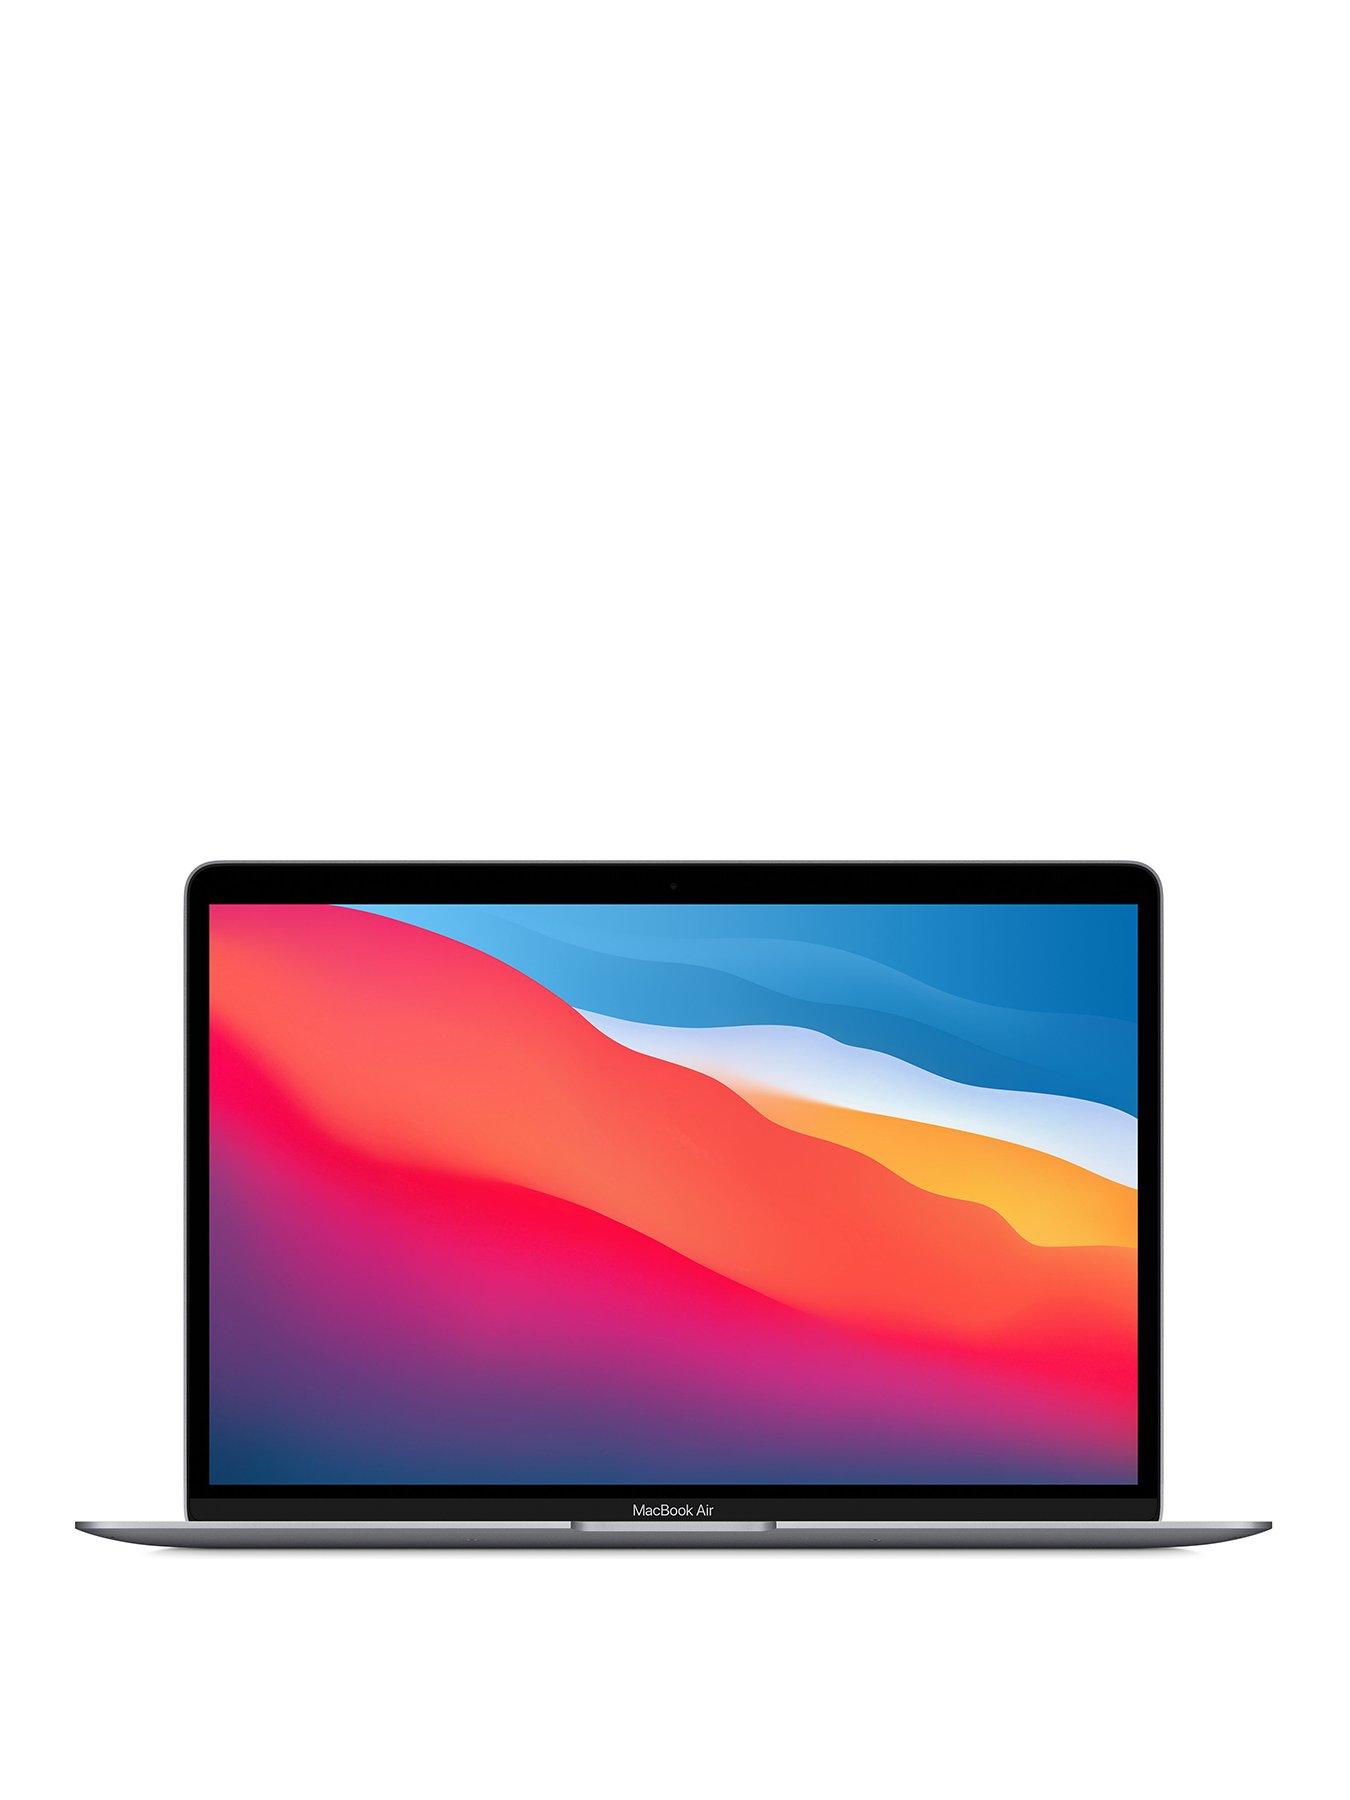 Apple MacBook Air (M1, 2020) 13 inch with 8-Core CPU and 7-Core